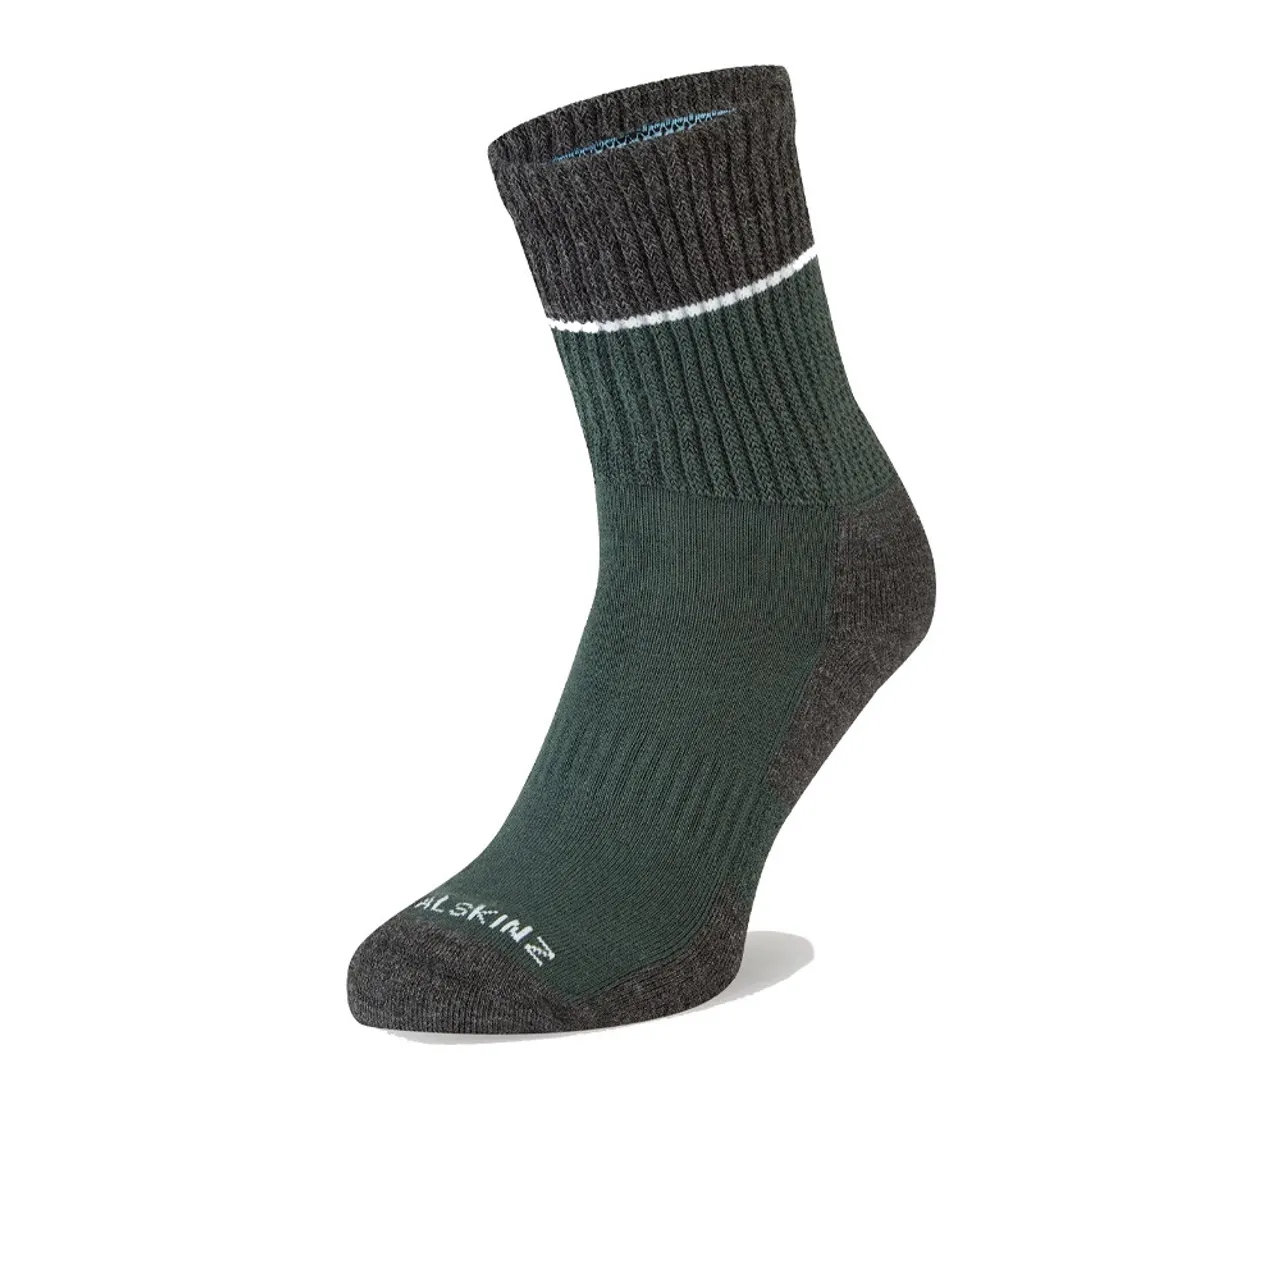 Sealskinz Thurton Solo Quickdry Mid Length Socks - SS24